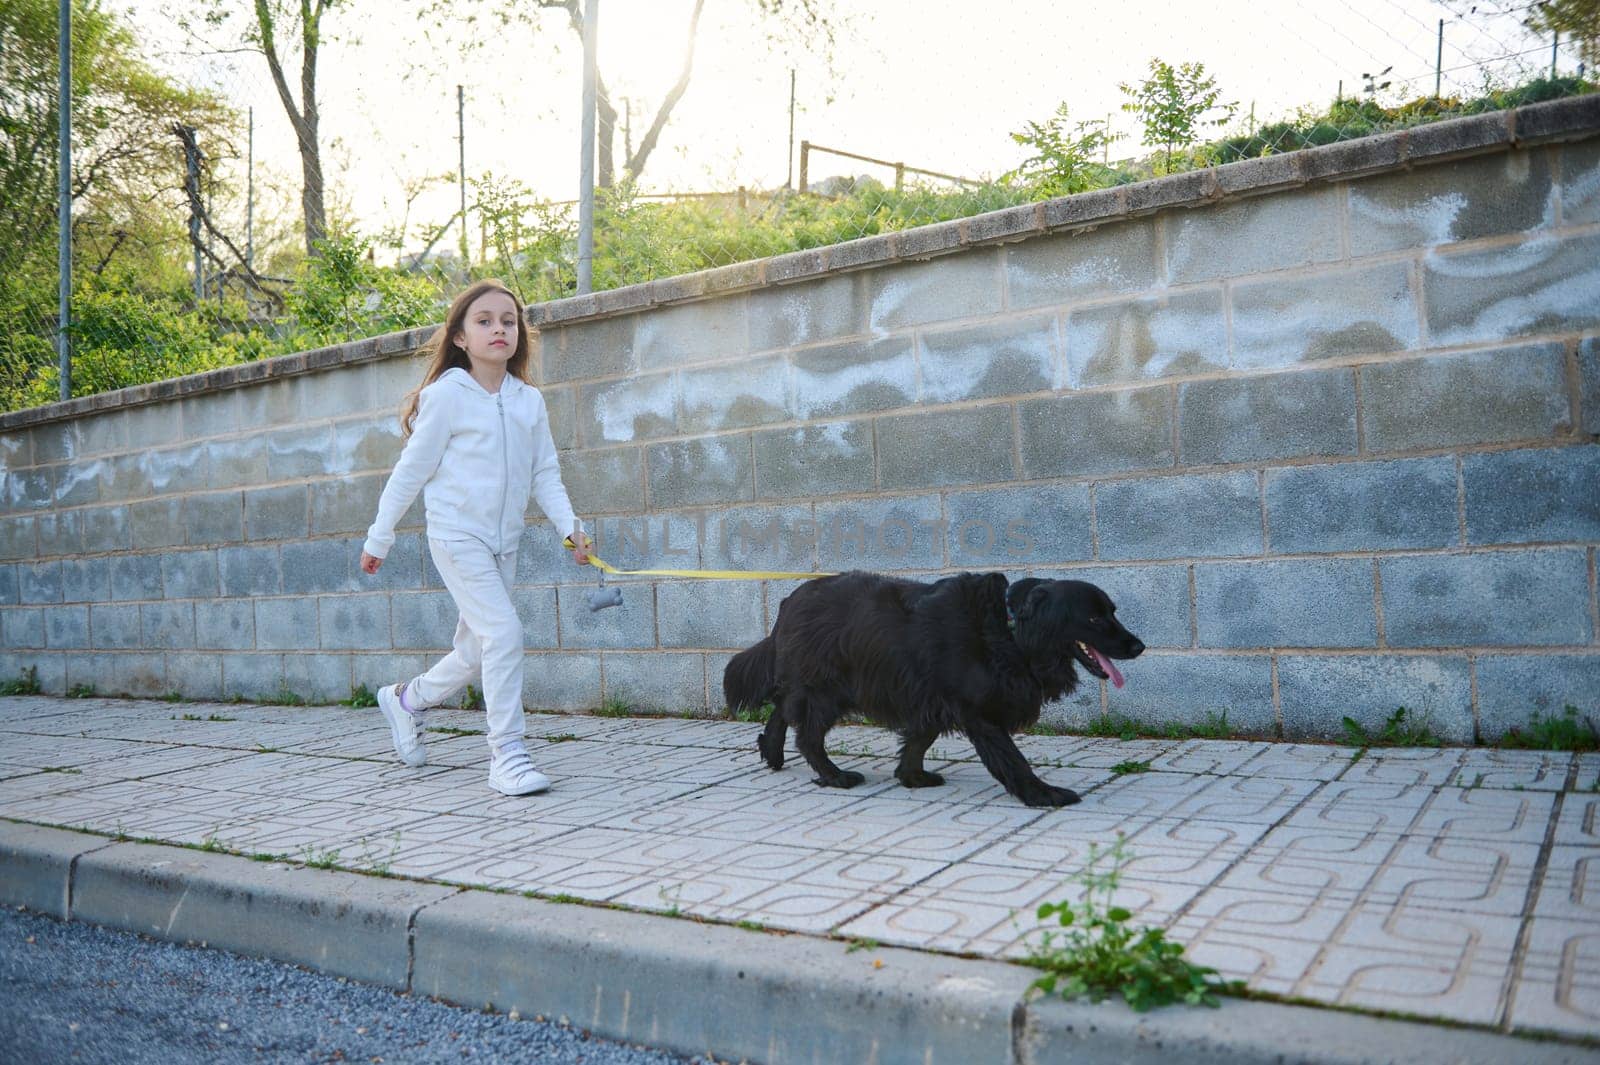 Front shot. Full length portrait of a little kid girl taking her cocker spaniel dog for a walk on leash ., against white stone fence background. People. Playing pets. Nature. Lifestyle. Childhood